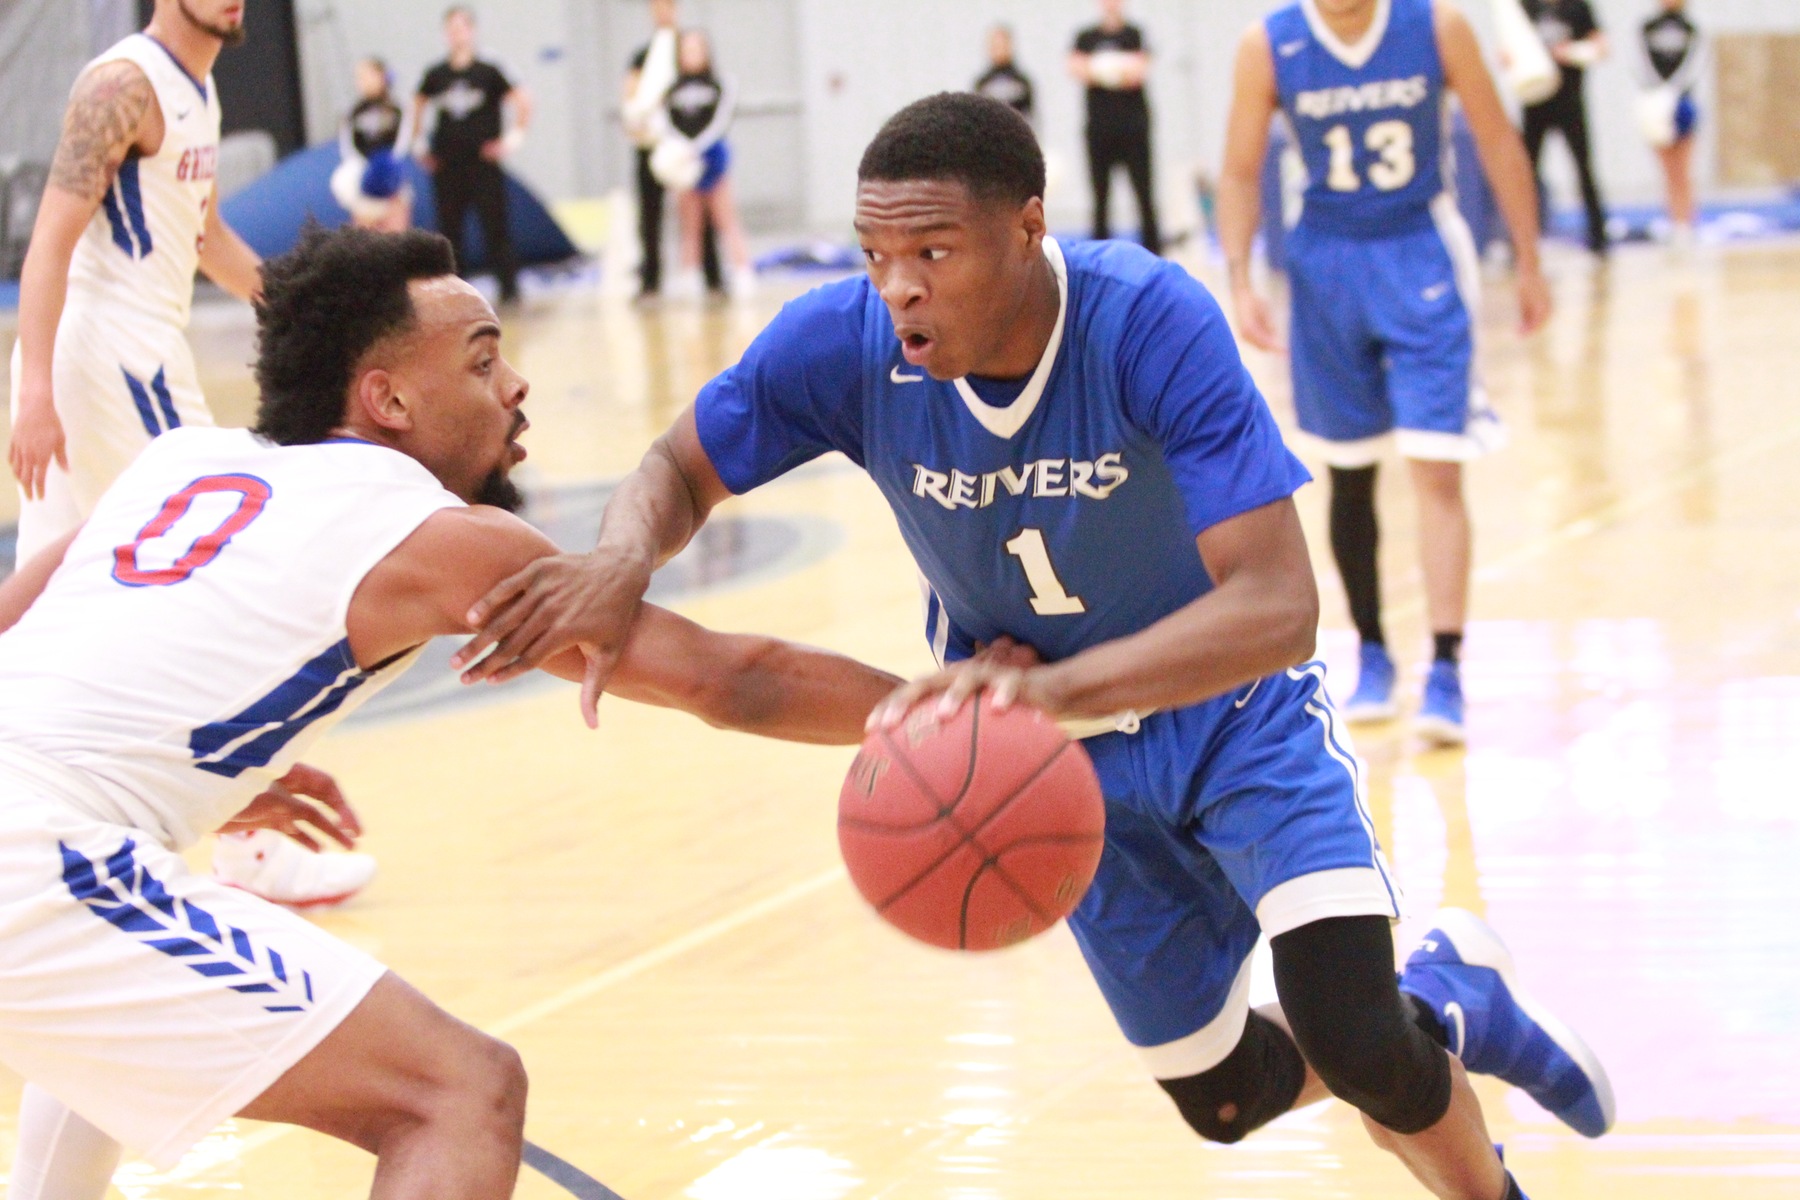 Decardo Day scored 11 points and dished out 7 assists in the Reivers' impressive 115-65 victory Saturday (11/18) night in Mason City, IA against previously unbeaten NIACC.